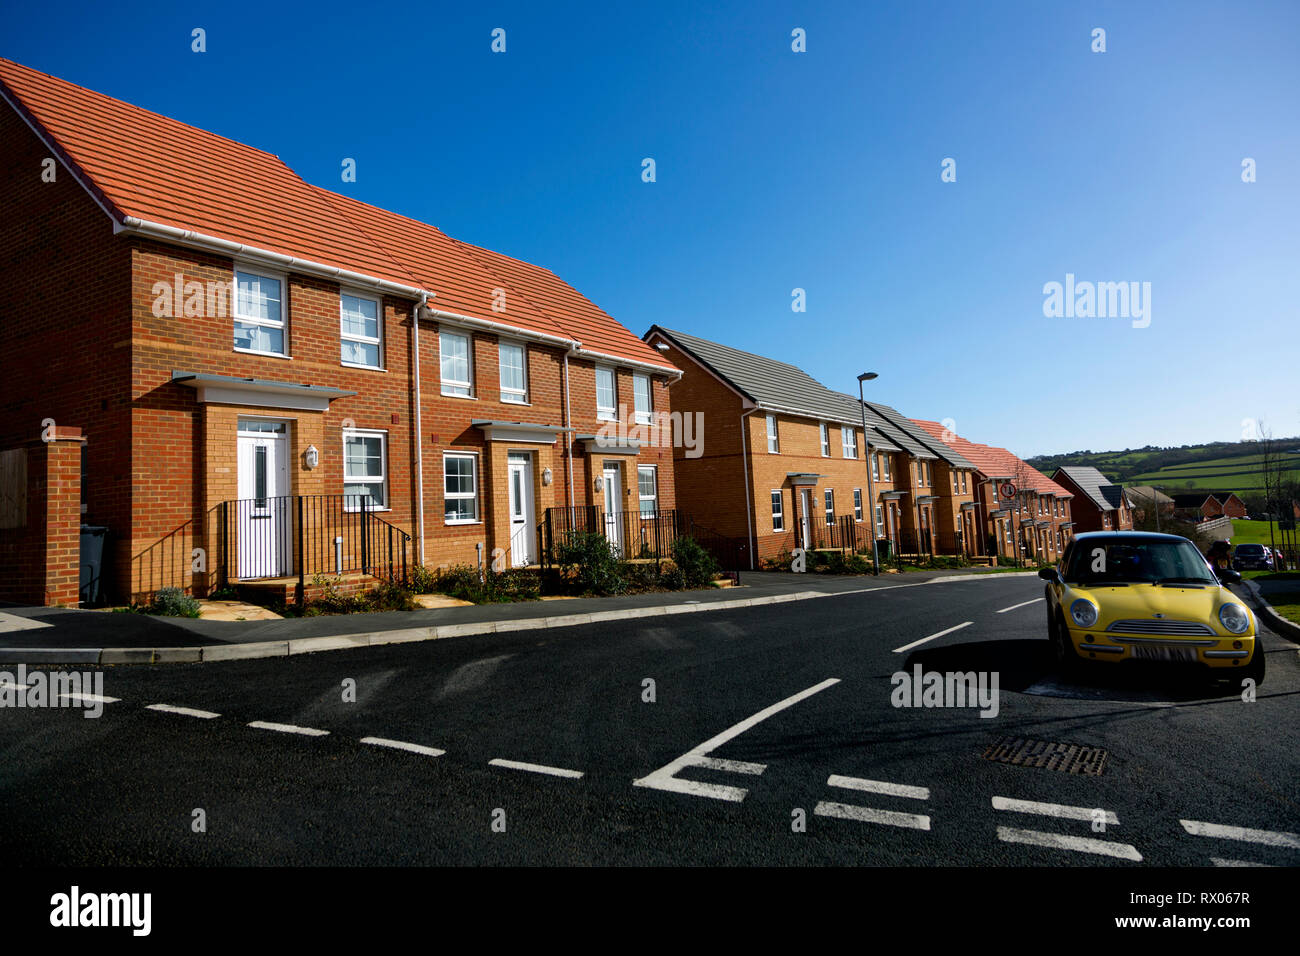 New,Build, green,belt,encroachment, terrace,street,road, timber,framed, low, Reducing, carbon emissions , carbon,footprint, energy, tile,tiled, field, Stock Photo